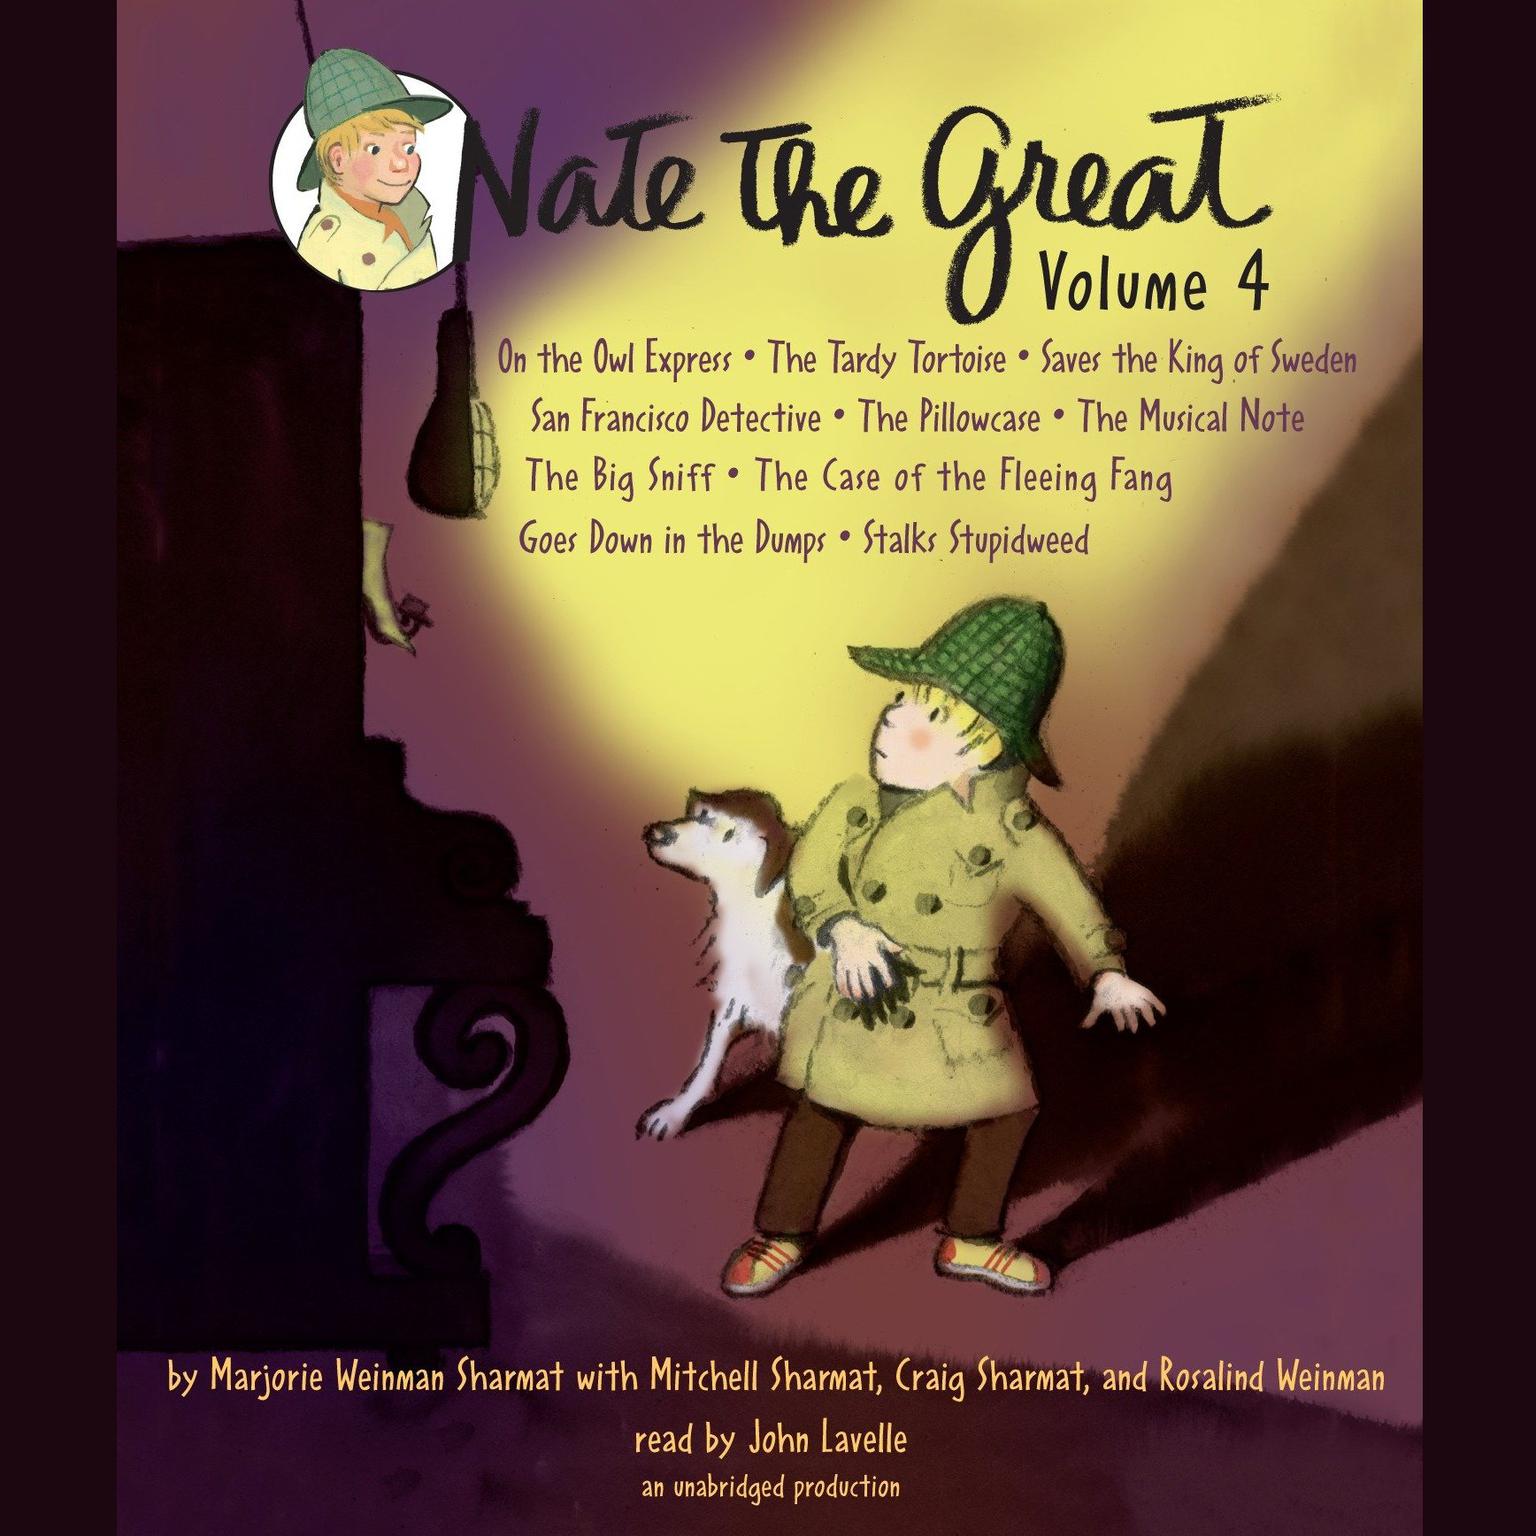 Nate the Great Collected Stories: Volume 4: Owl Express; Tardy Tortoise; King of Sweden; San Francisco Detective; Pillowcase ; Musical Note; Big Sniff; and Me; Goes Down in the Dumps; Stalks Stupidweed Audiobook, by Marjorie Weinman Sharmat